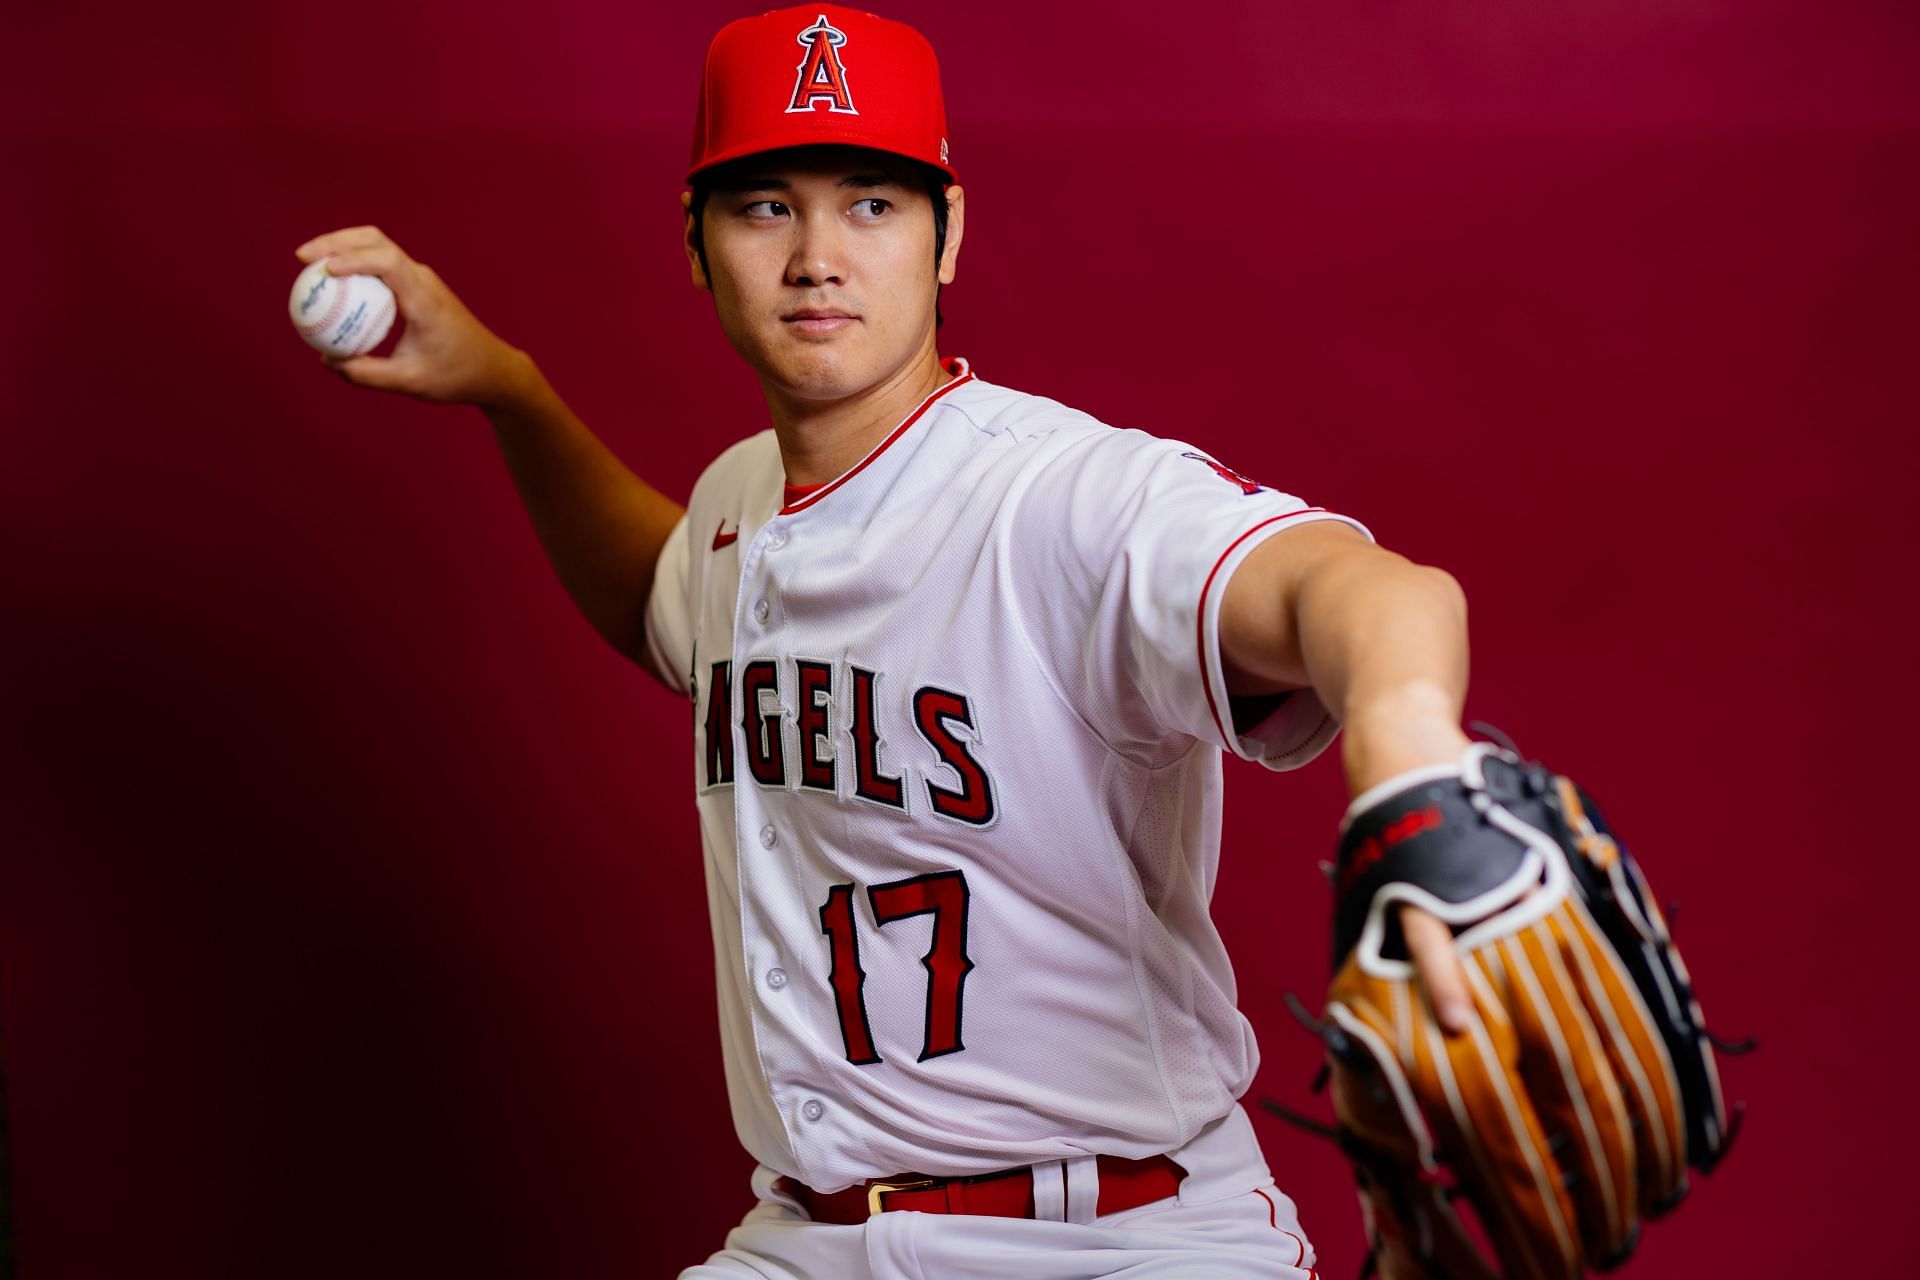 Shohei Ohtani of the Los Angeles Angels poses during photo day.